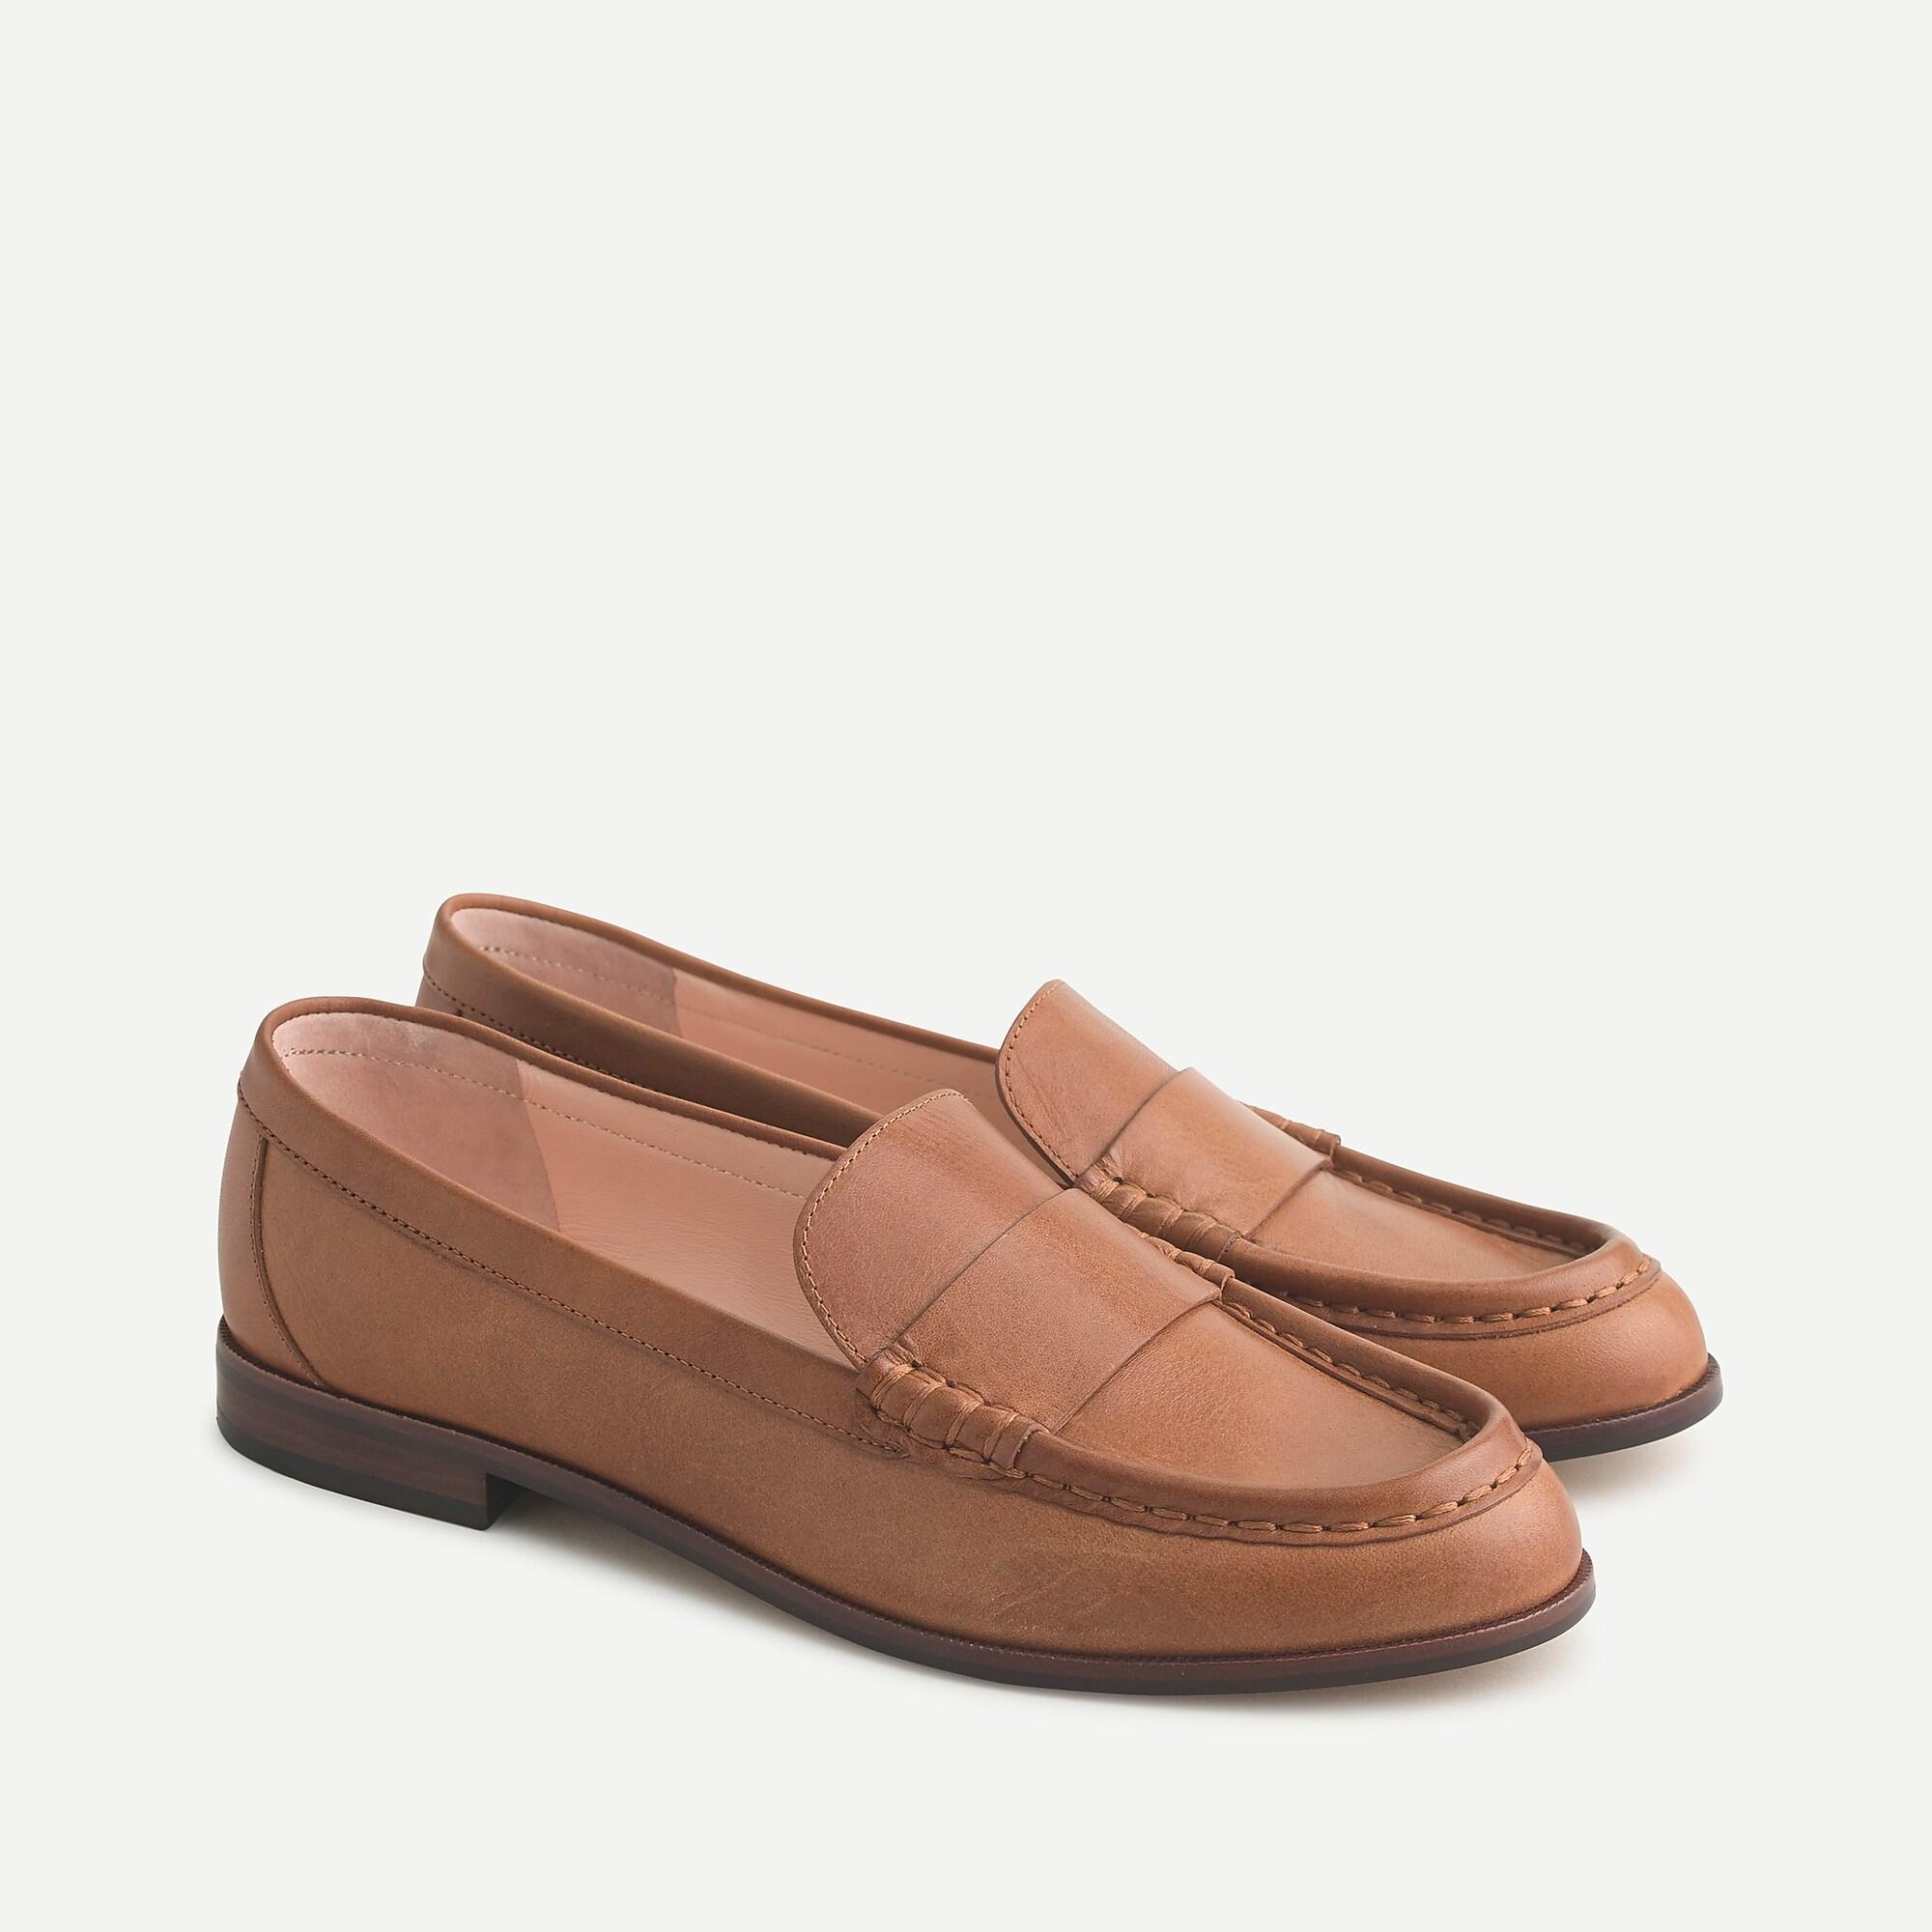 J.Crew Classic Leather Penny Loafers in Brown - Lyst